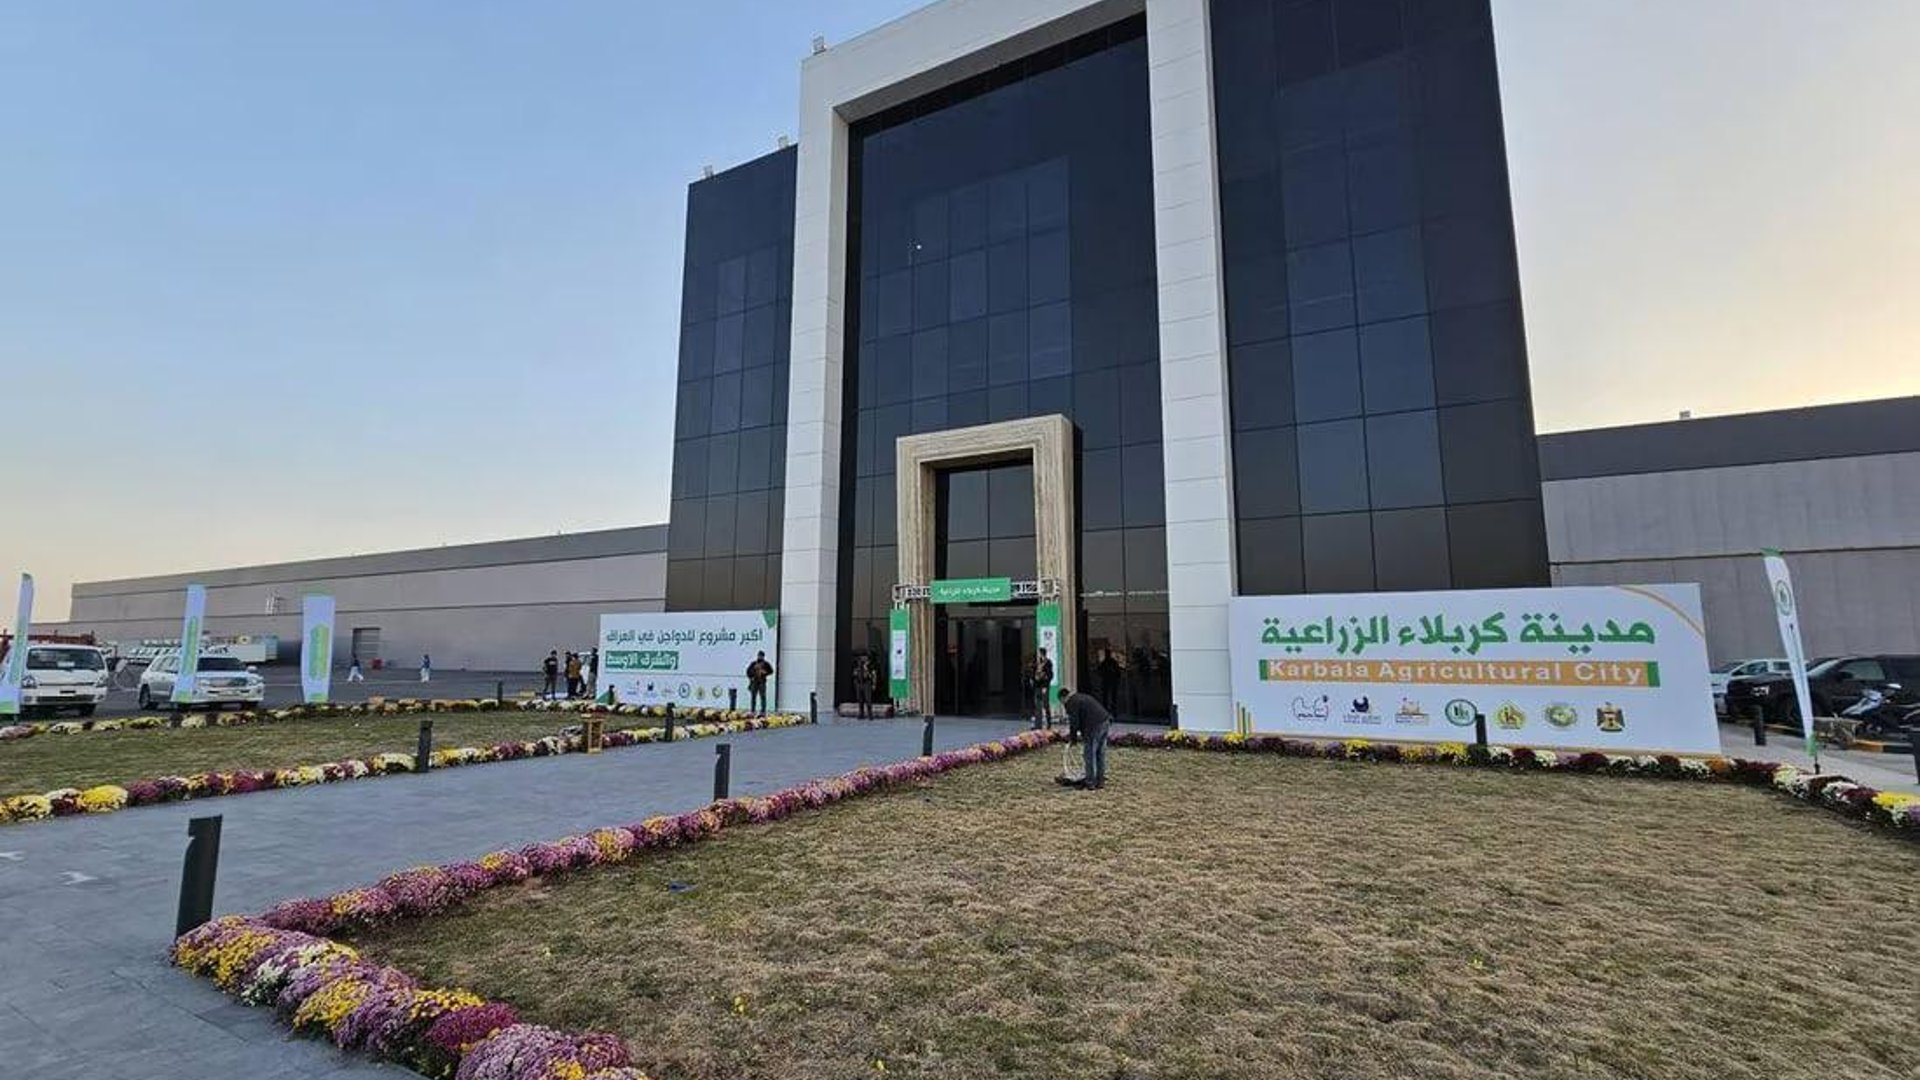 AlSudani inaugurates poultry project in Karbala in partnership with the private sector